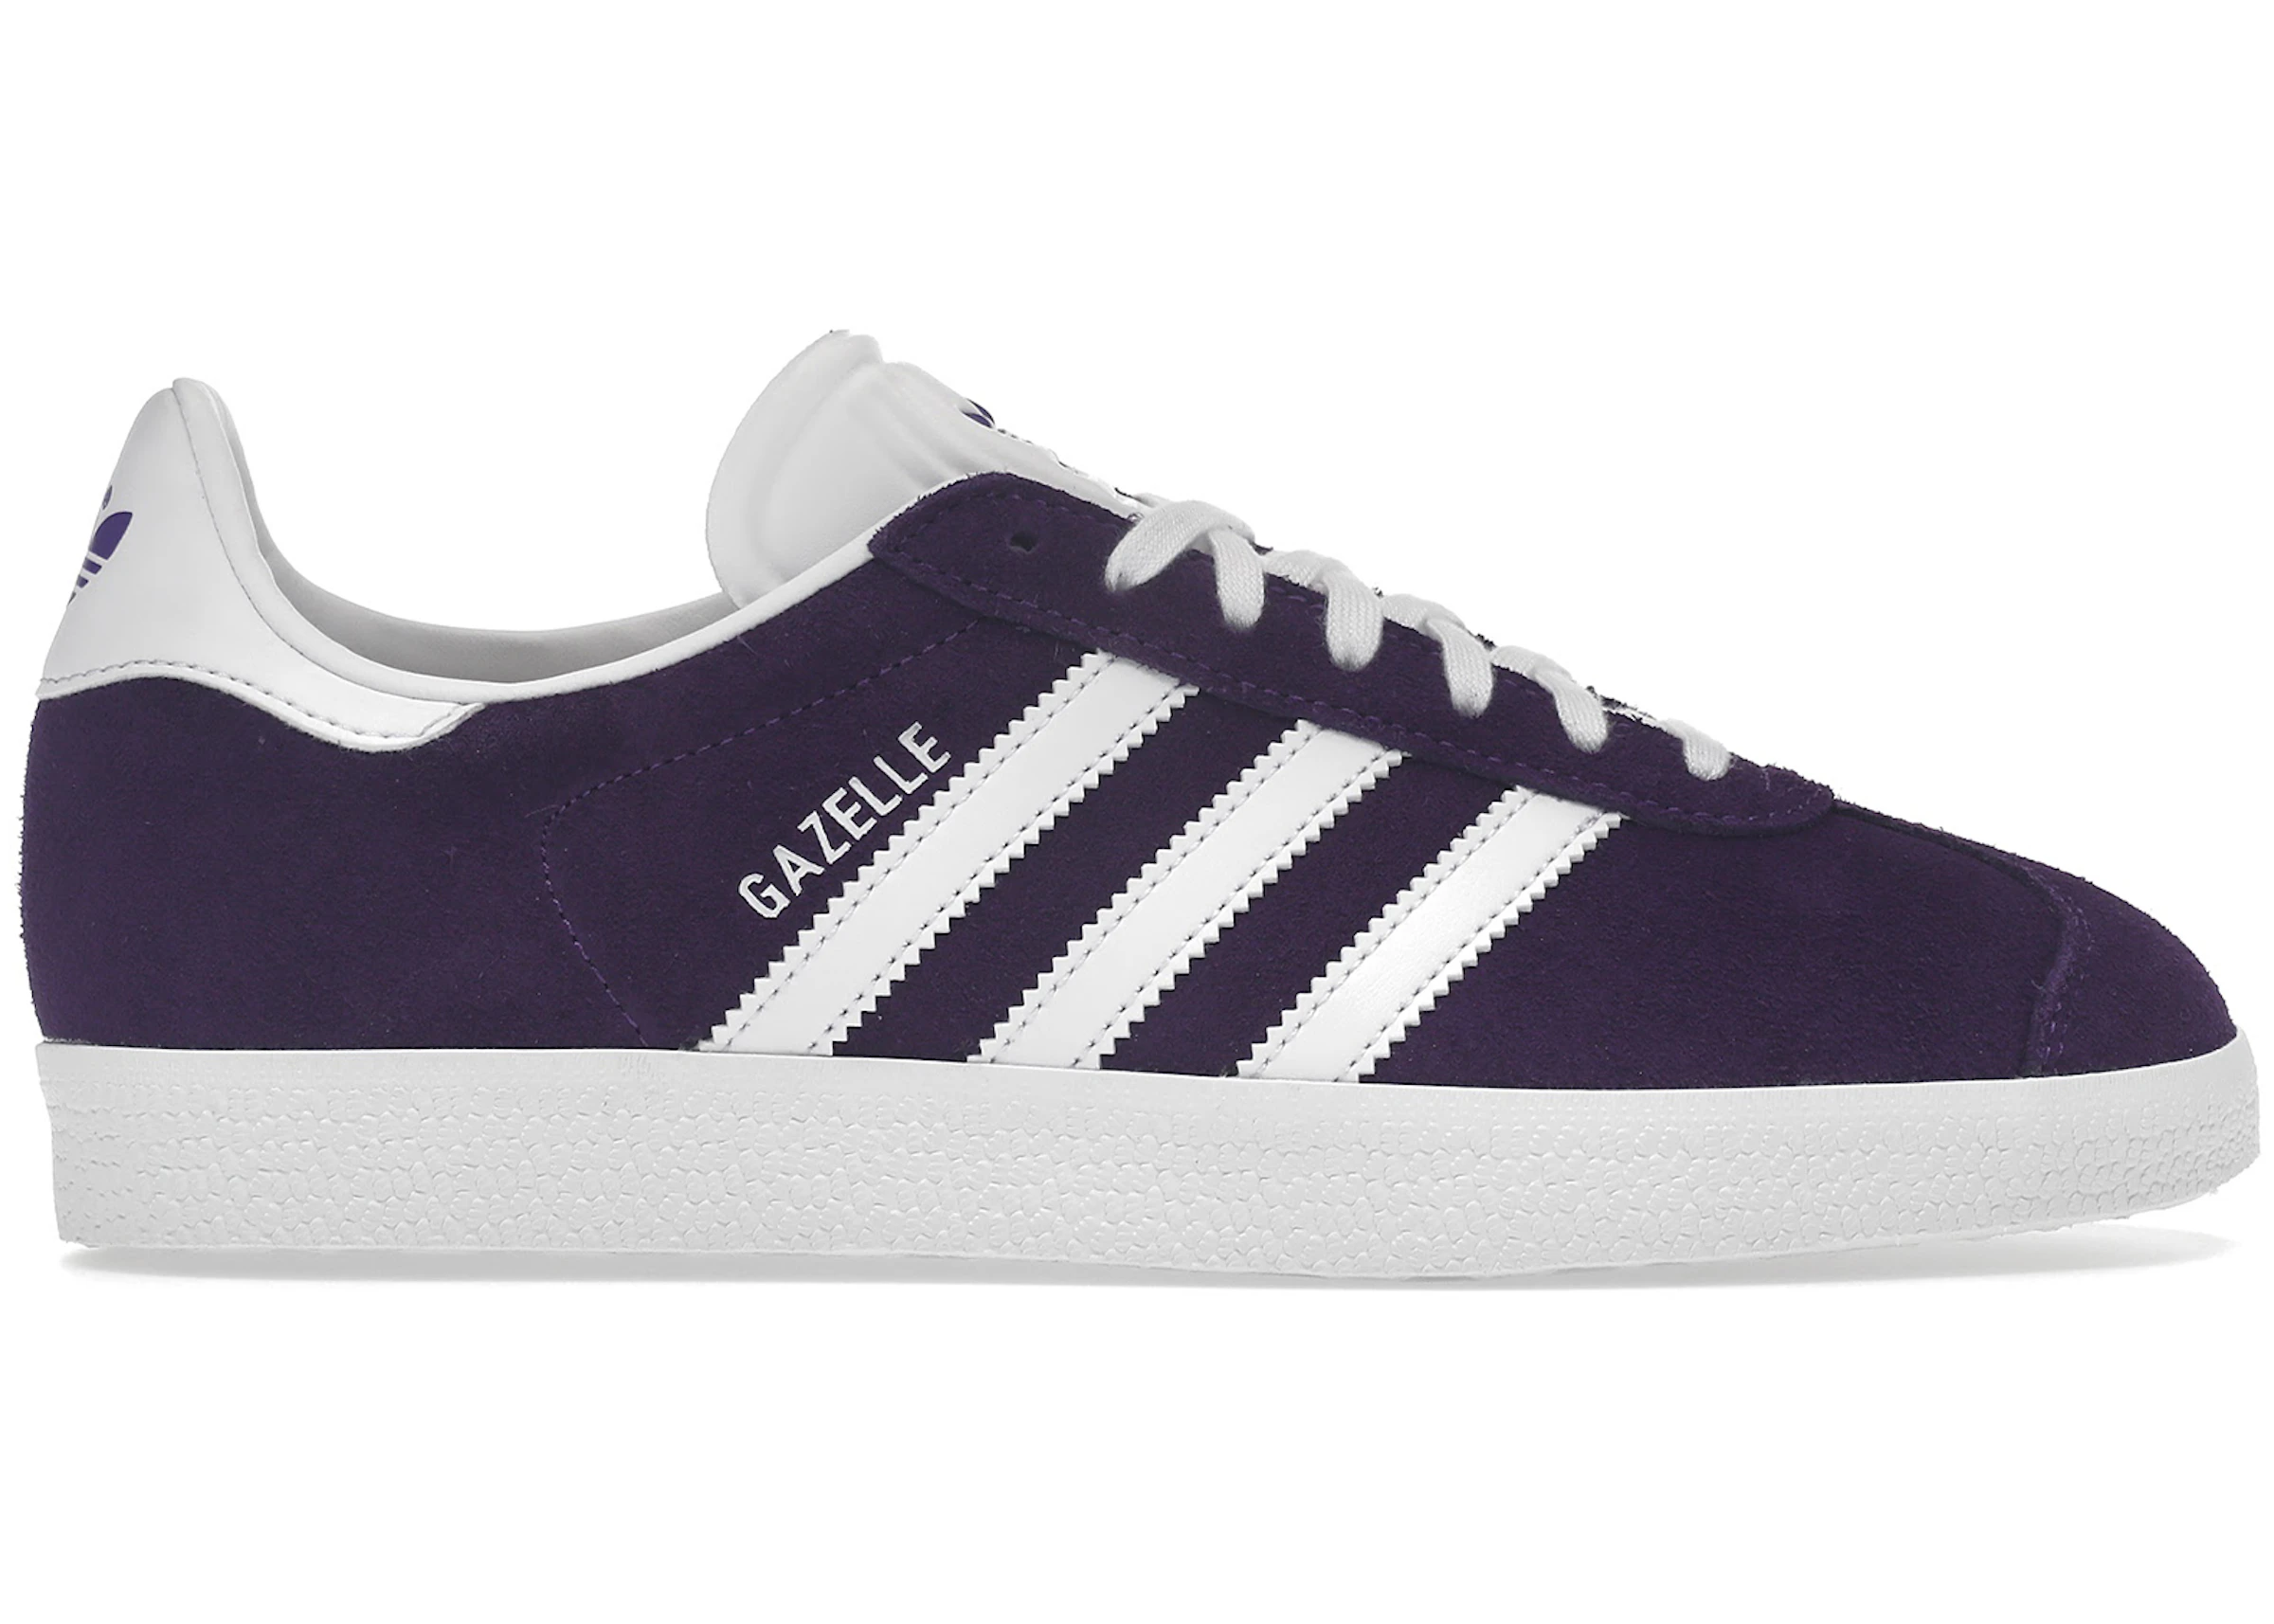 Buy adidas Gazelle Shoes & New Sneakers - StockX